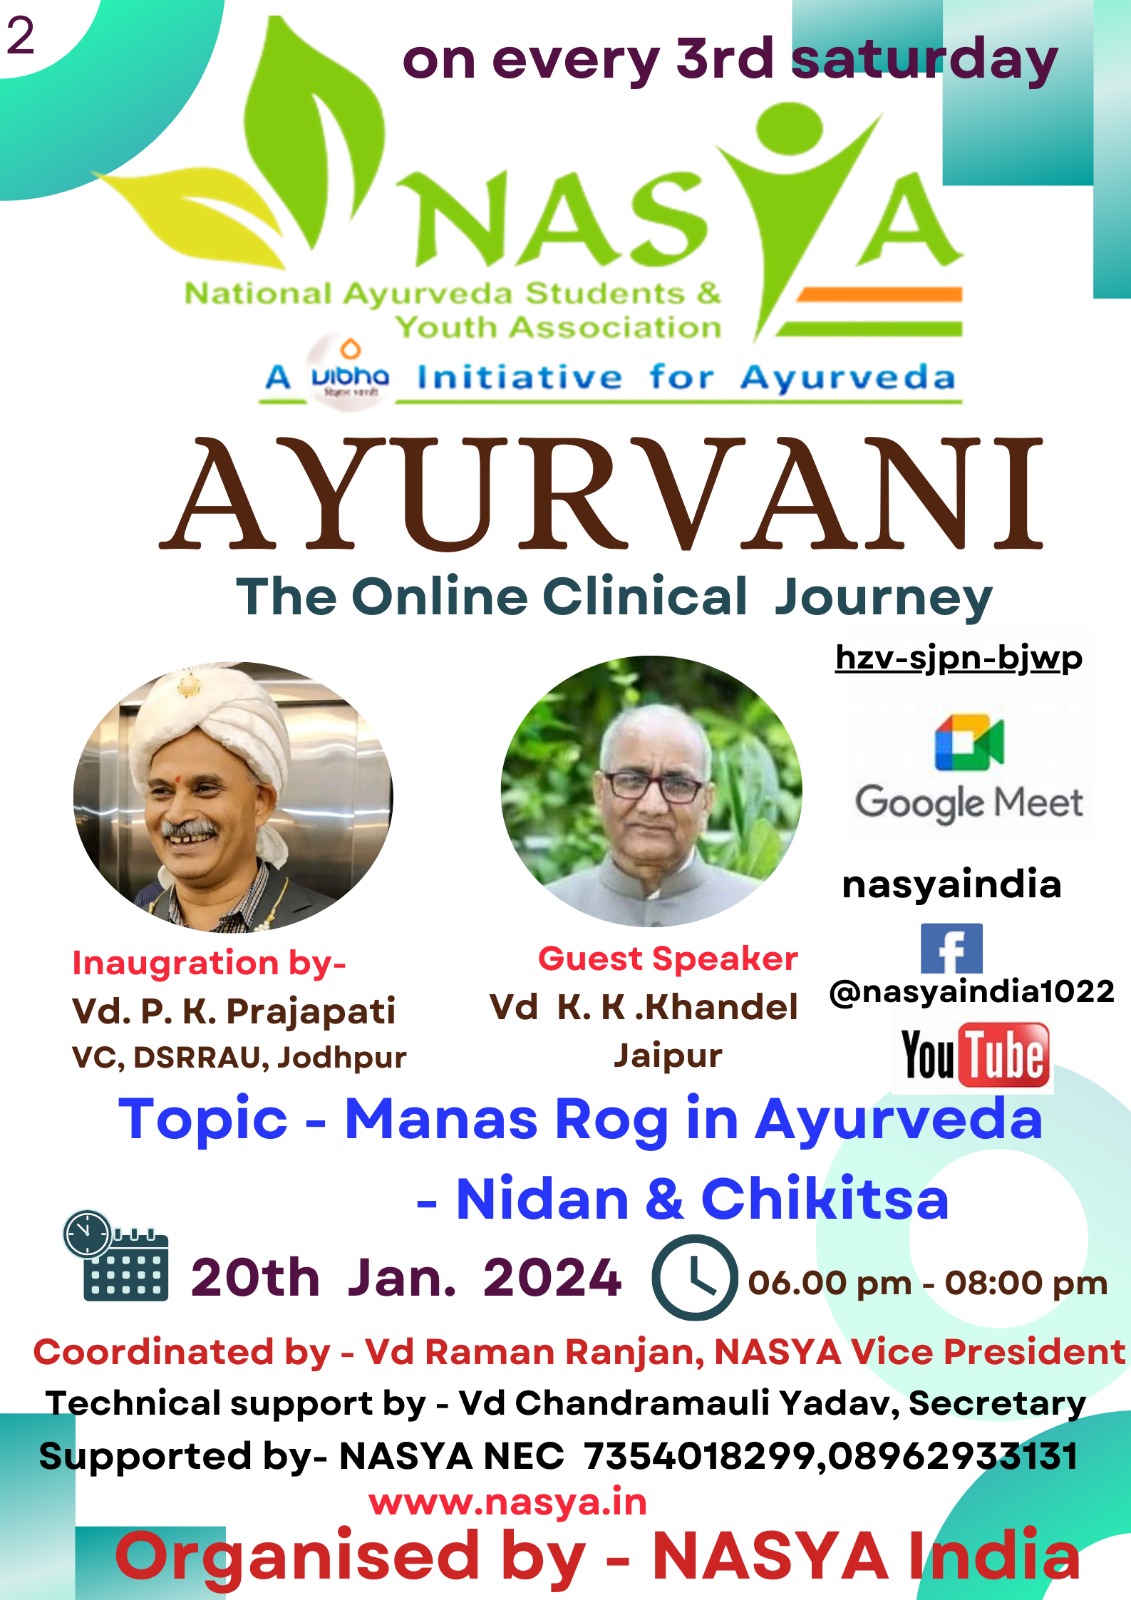 Event - AYURVANI - The Online Clinical Journey